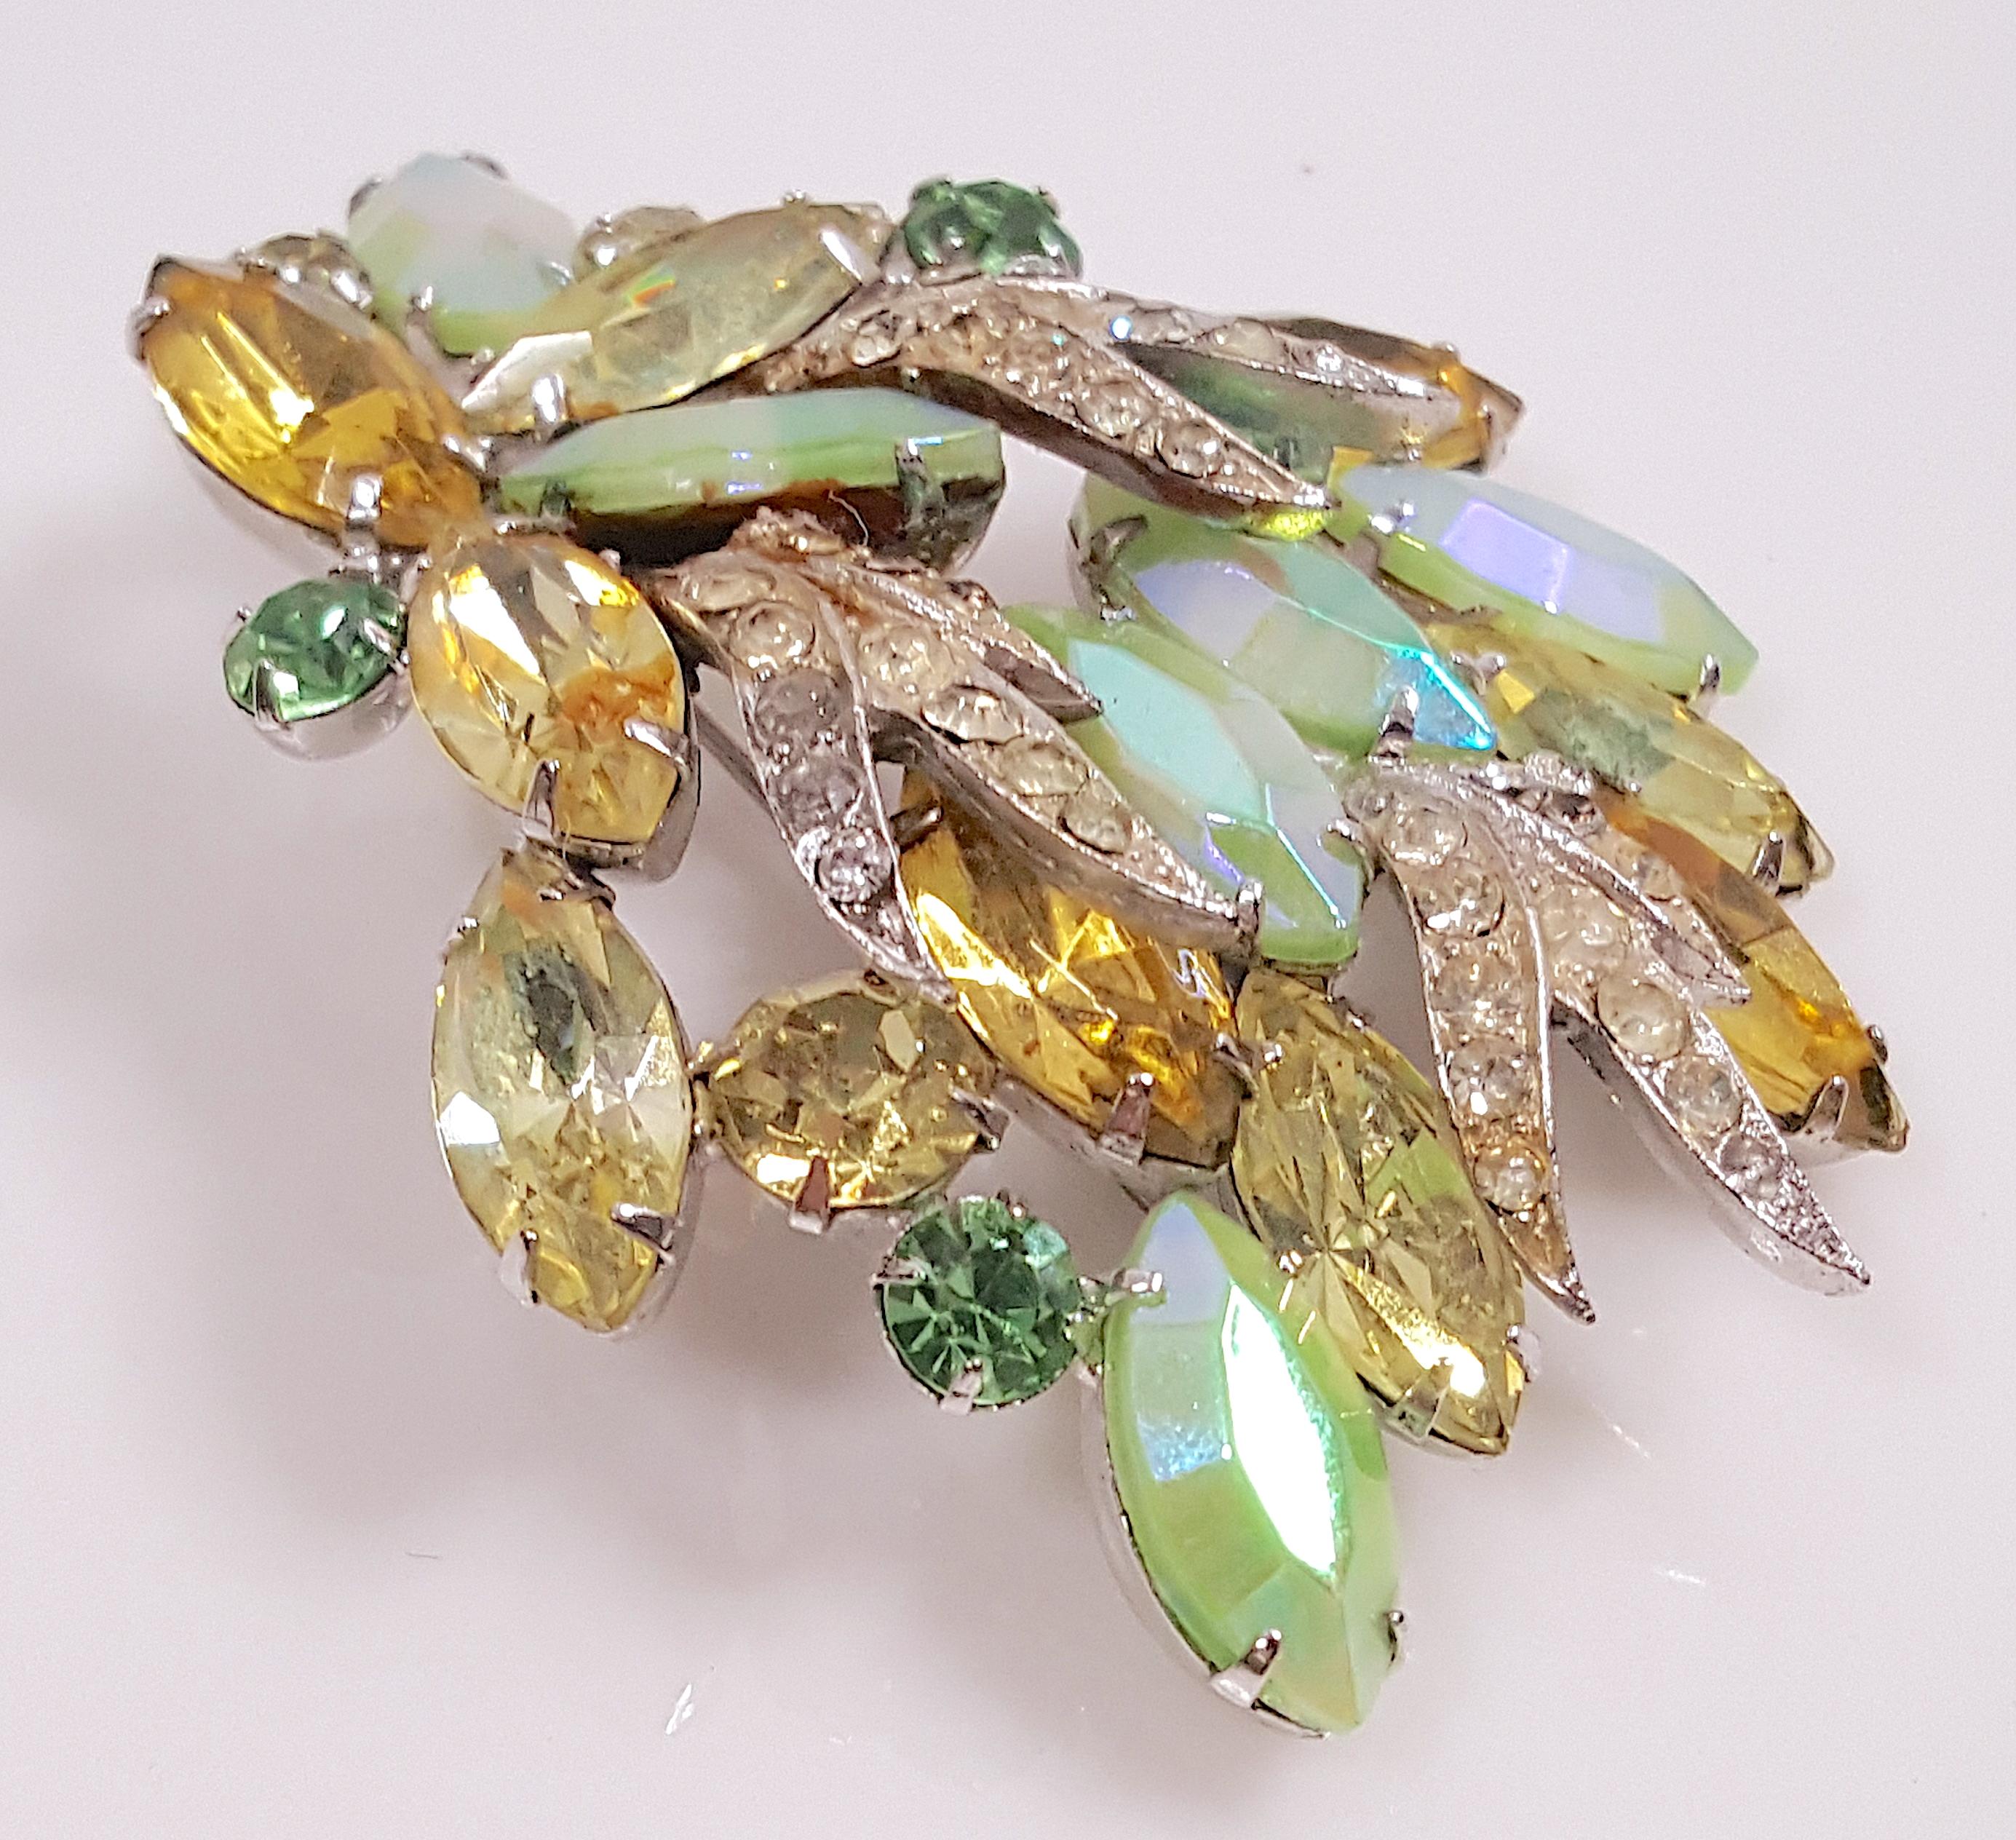 This colorful prong-set crystal spray brooch by Schreiner New York was made to compliment luxury clothing by a U.S.-based fashion designer, such as Pauline Trigere, in the late 1950s. This piece is special because it shows the unique decorative